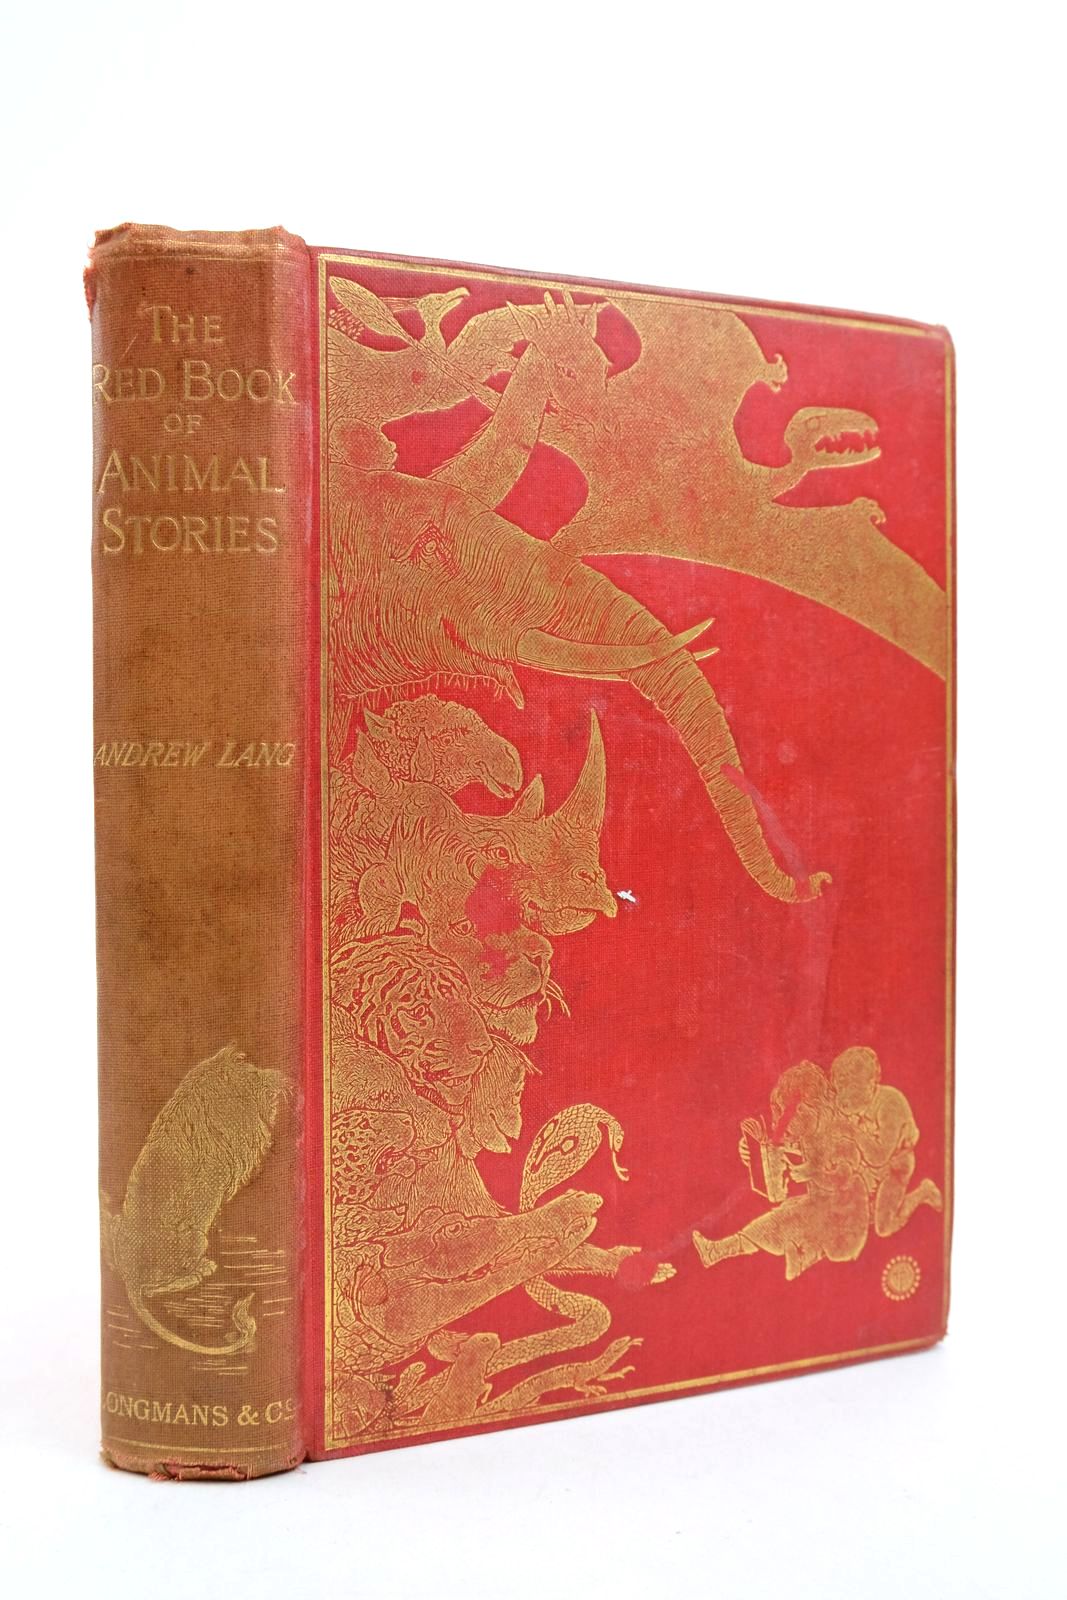 Photo of THE RED BOOK OF ANIMAL STORIES- Stock Number: 2139943